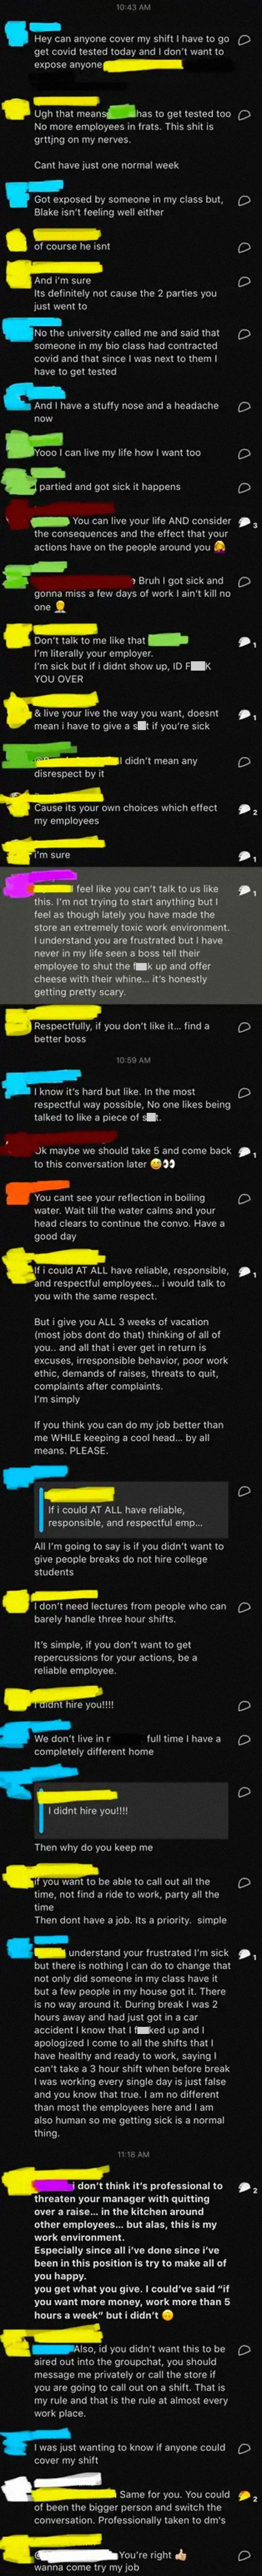 I Was Told To Post This Here. I Worked At This Store For 4 Years (Longer Than Anyone In The Entire Store) And We Recently Got A New General Manager. This Is How She (Yellow) Speaks To Us In Our Work Group Chat (I Am Purple). I Quit After This Conversation